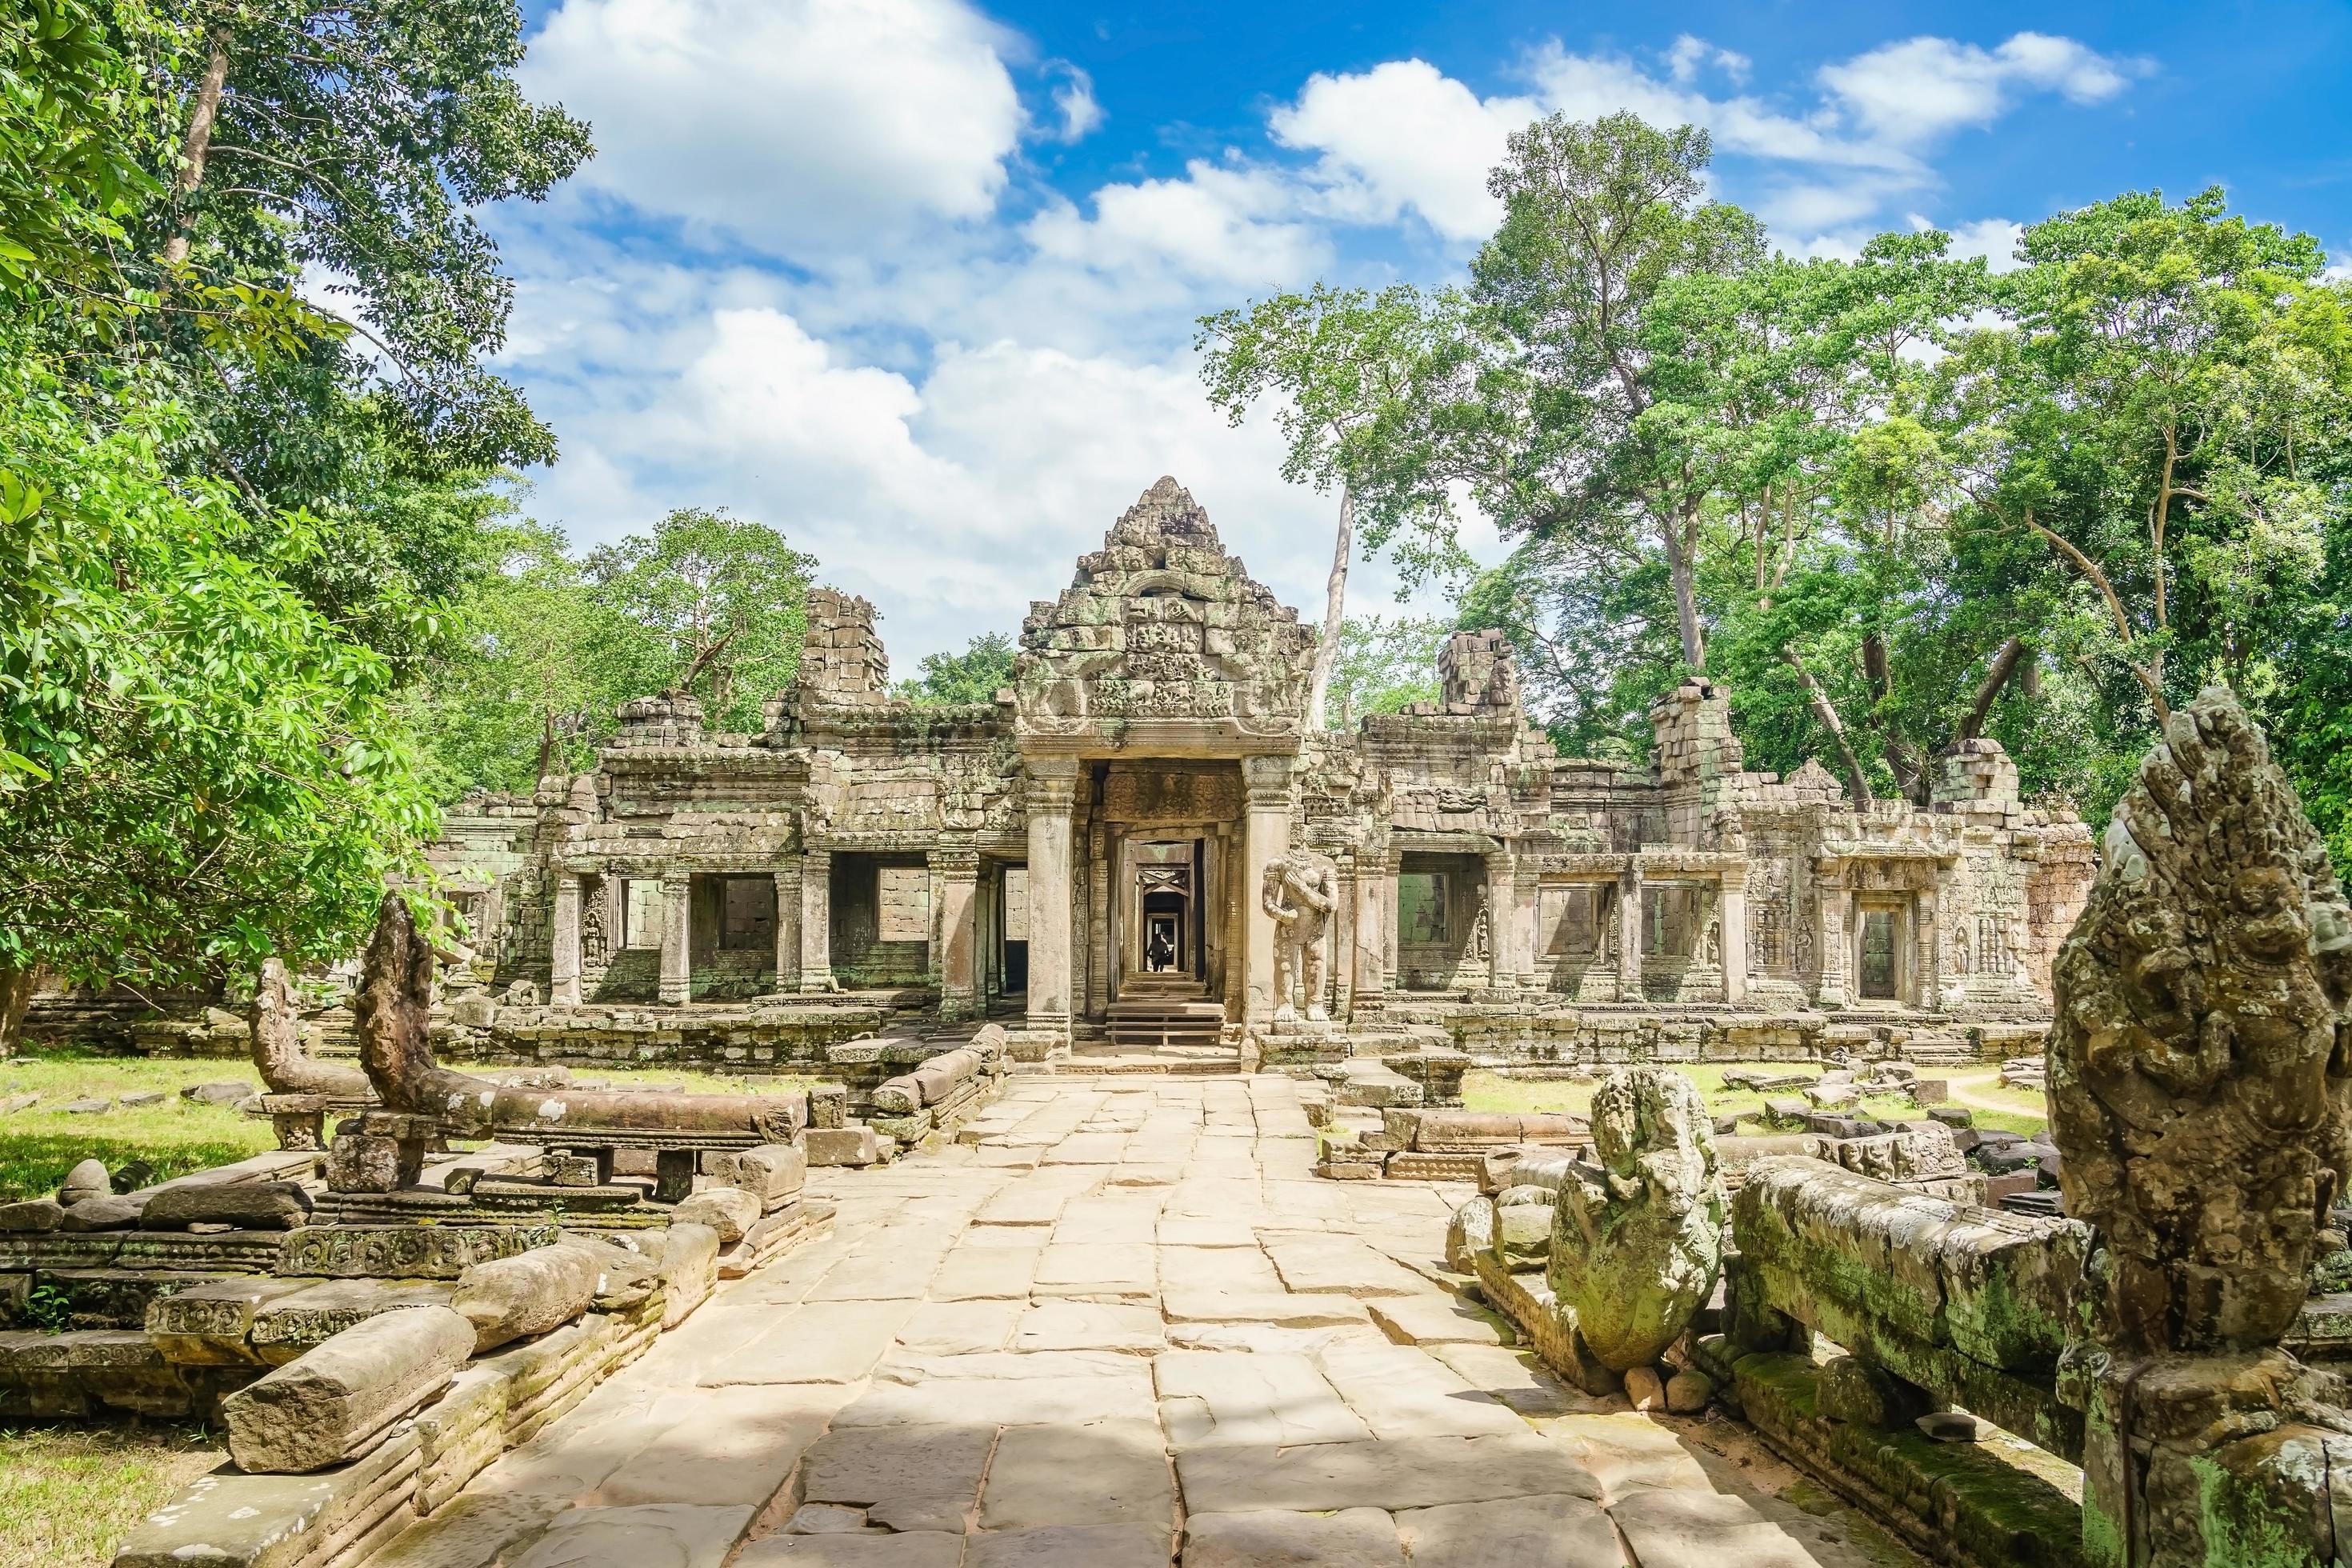 Banteay Kdei entrance in the Angkor Wat temple complex, Siem Reap, Cambodia photo